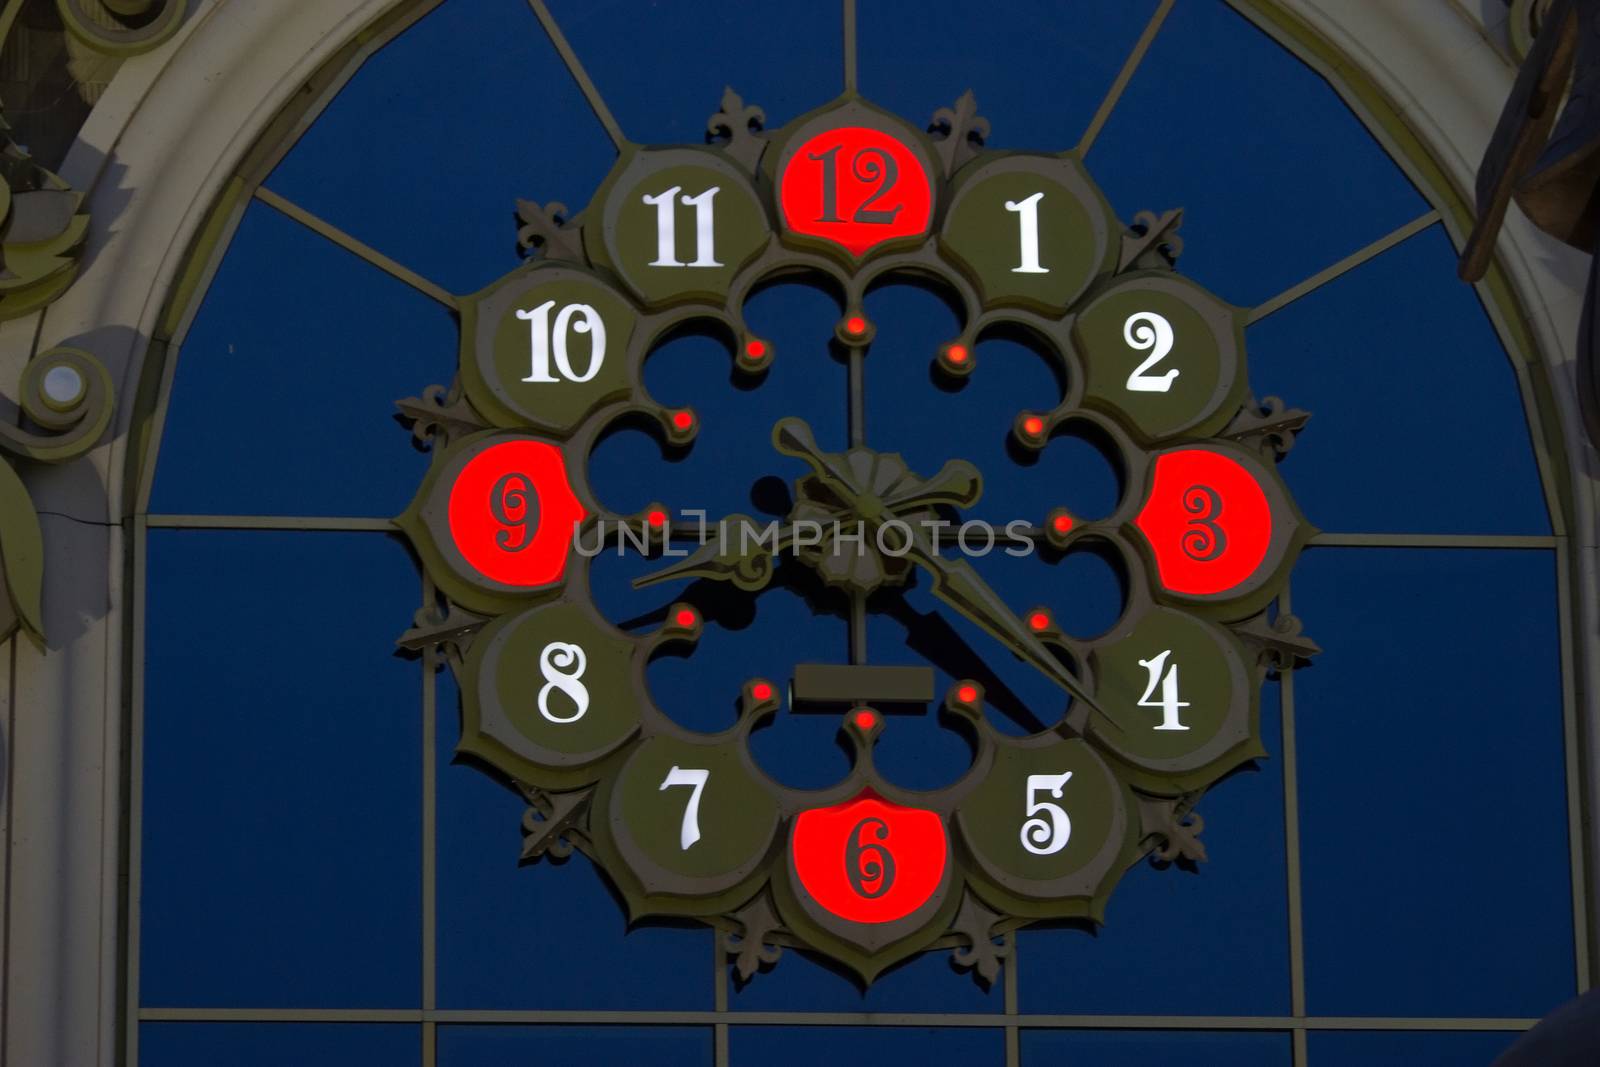 colorful illuminated clock with red numbers, night